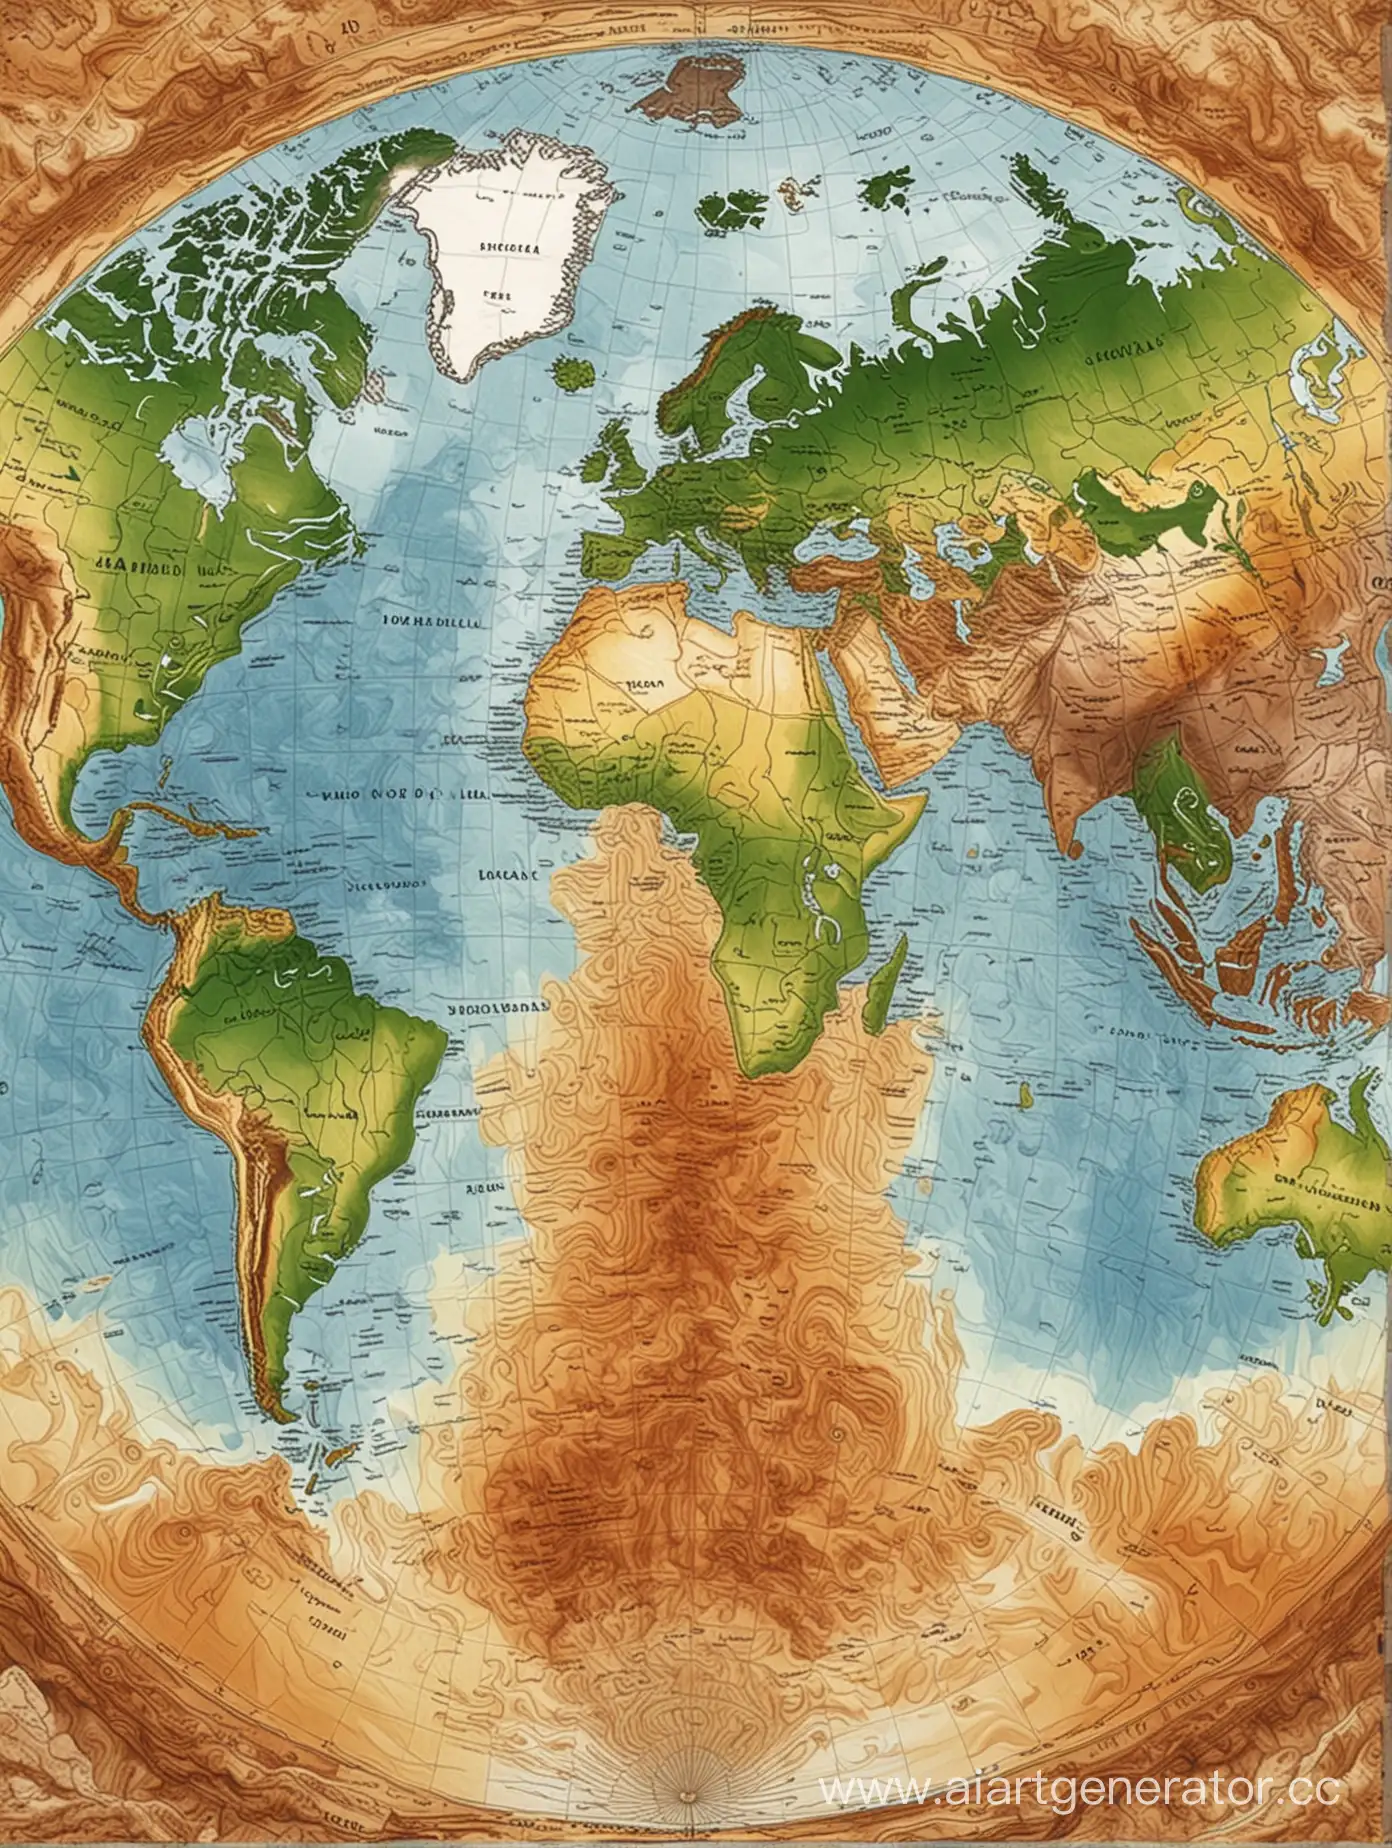 Detailed-Topographic-Map-of-Earths-Terrain-Features